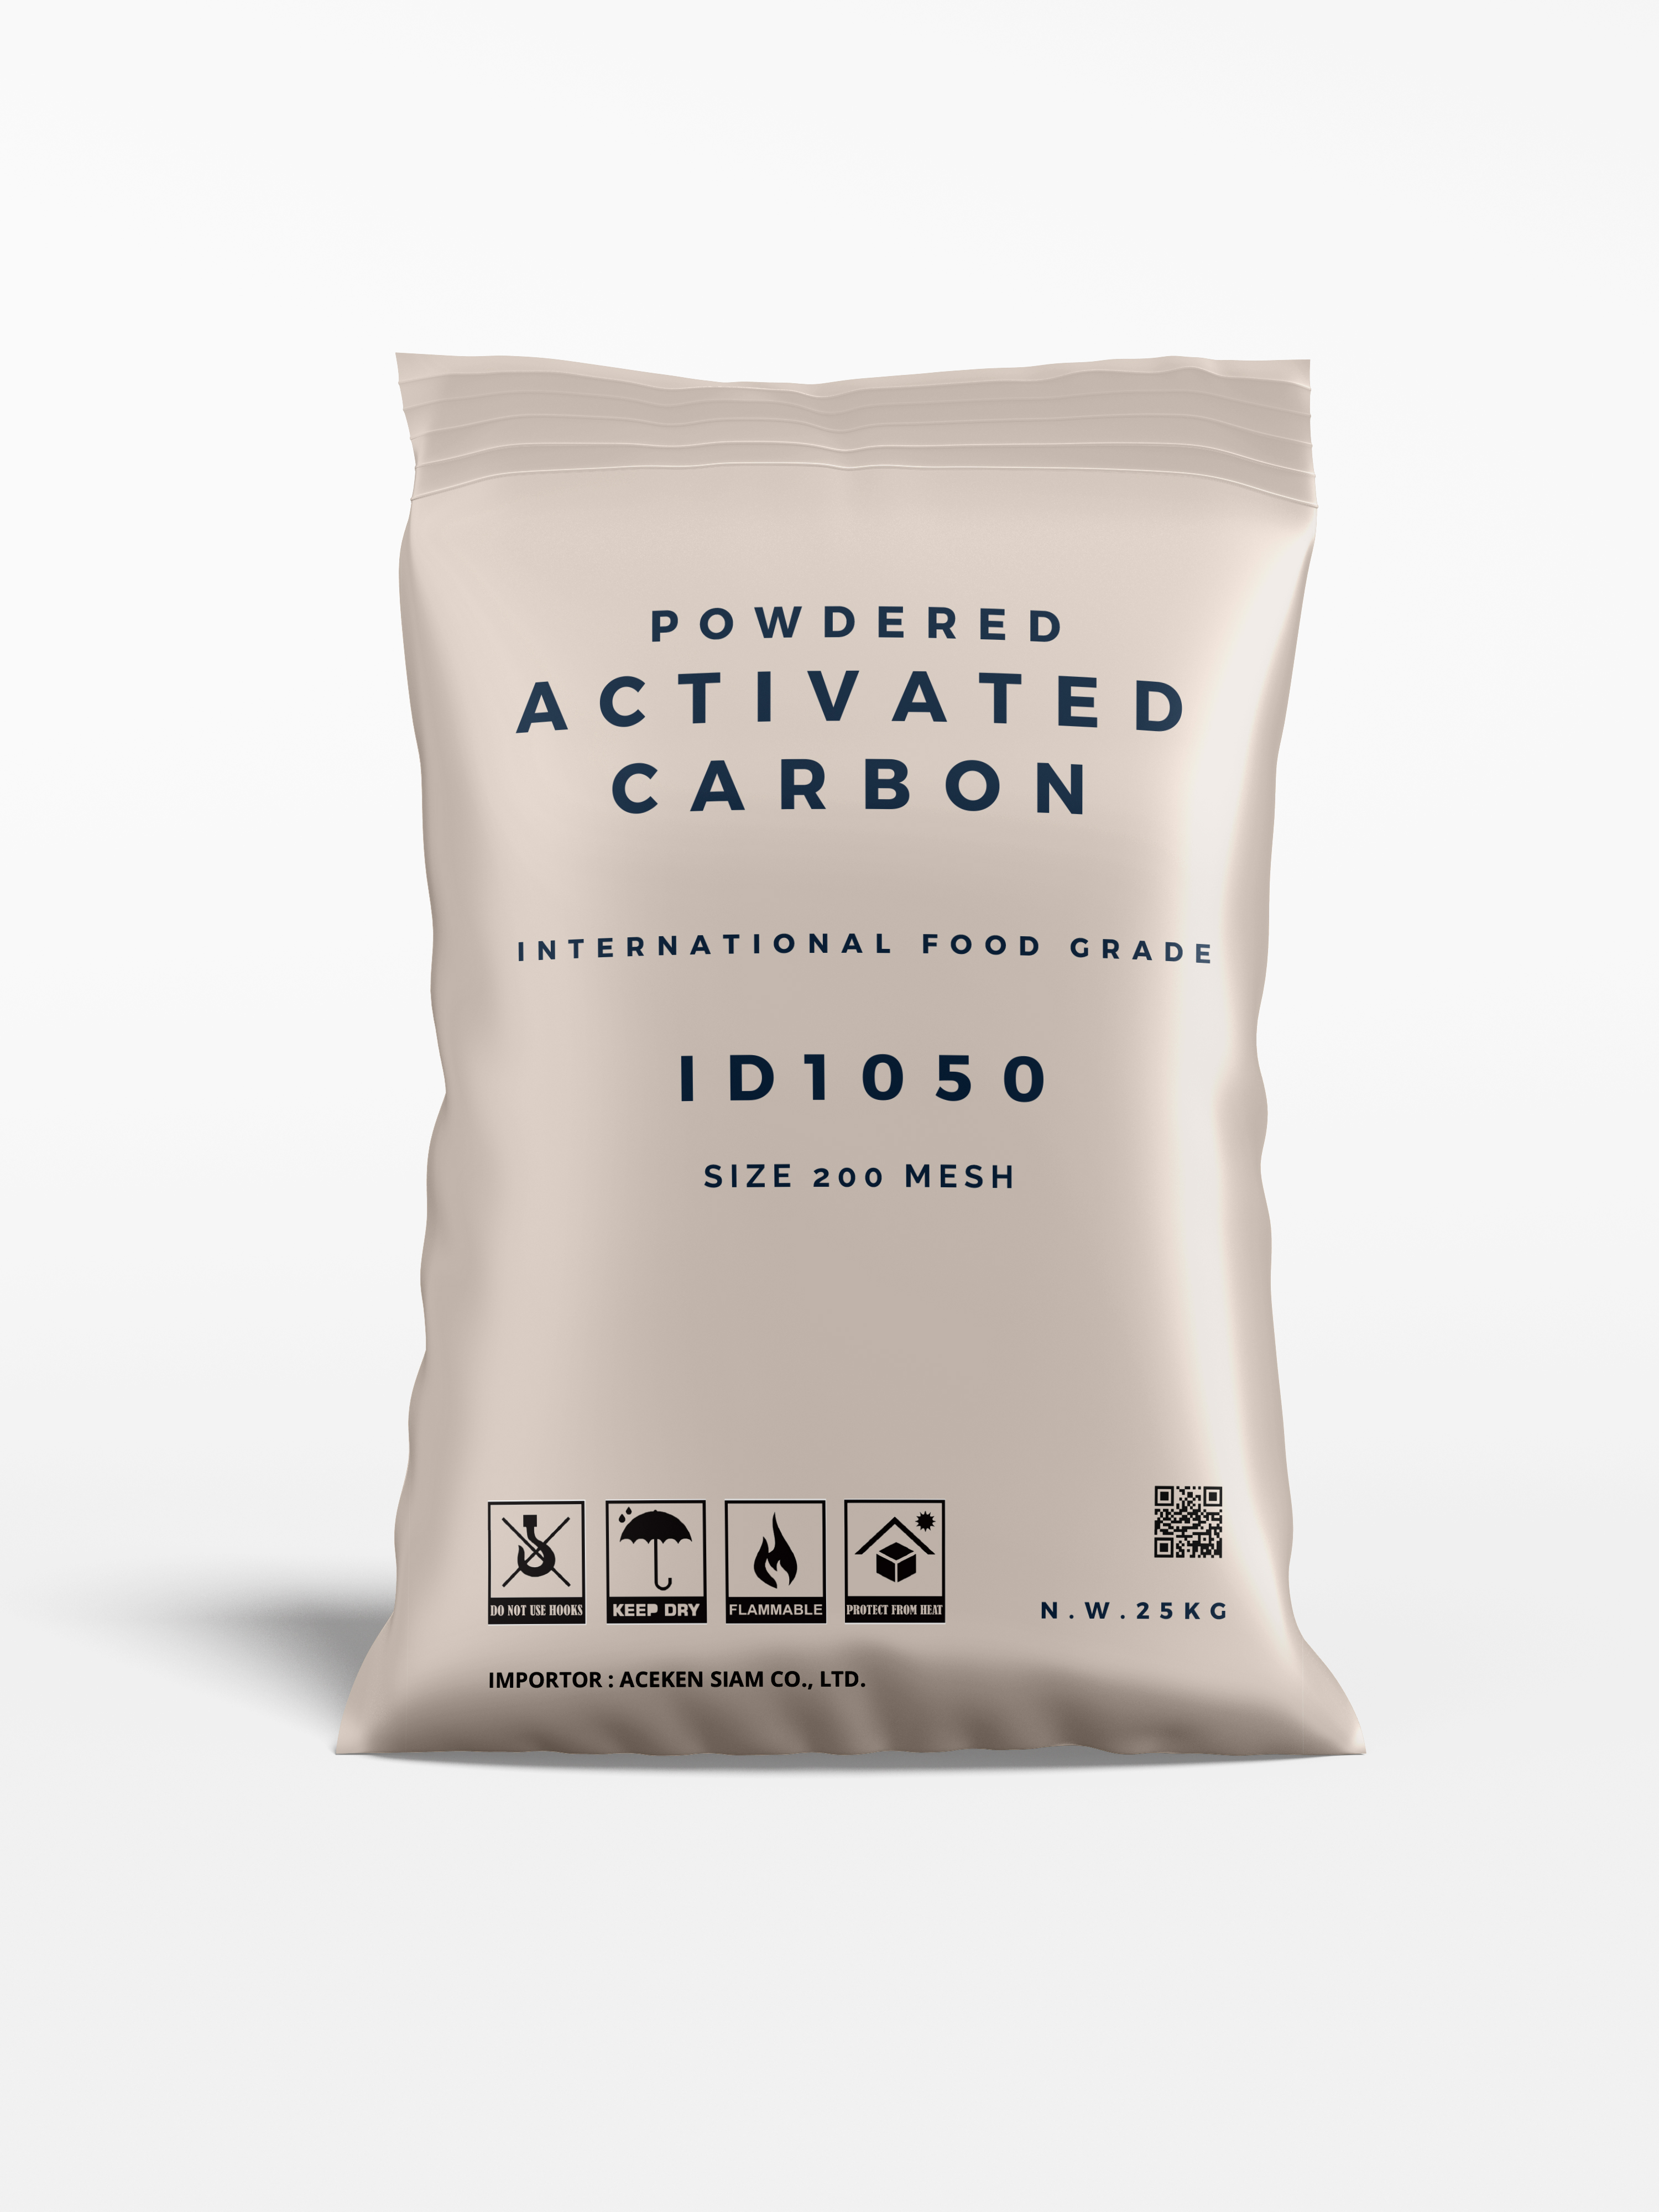 Powdered Activated Carbon ID1050 size 200 mesh International Food Grade